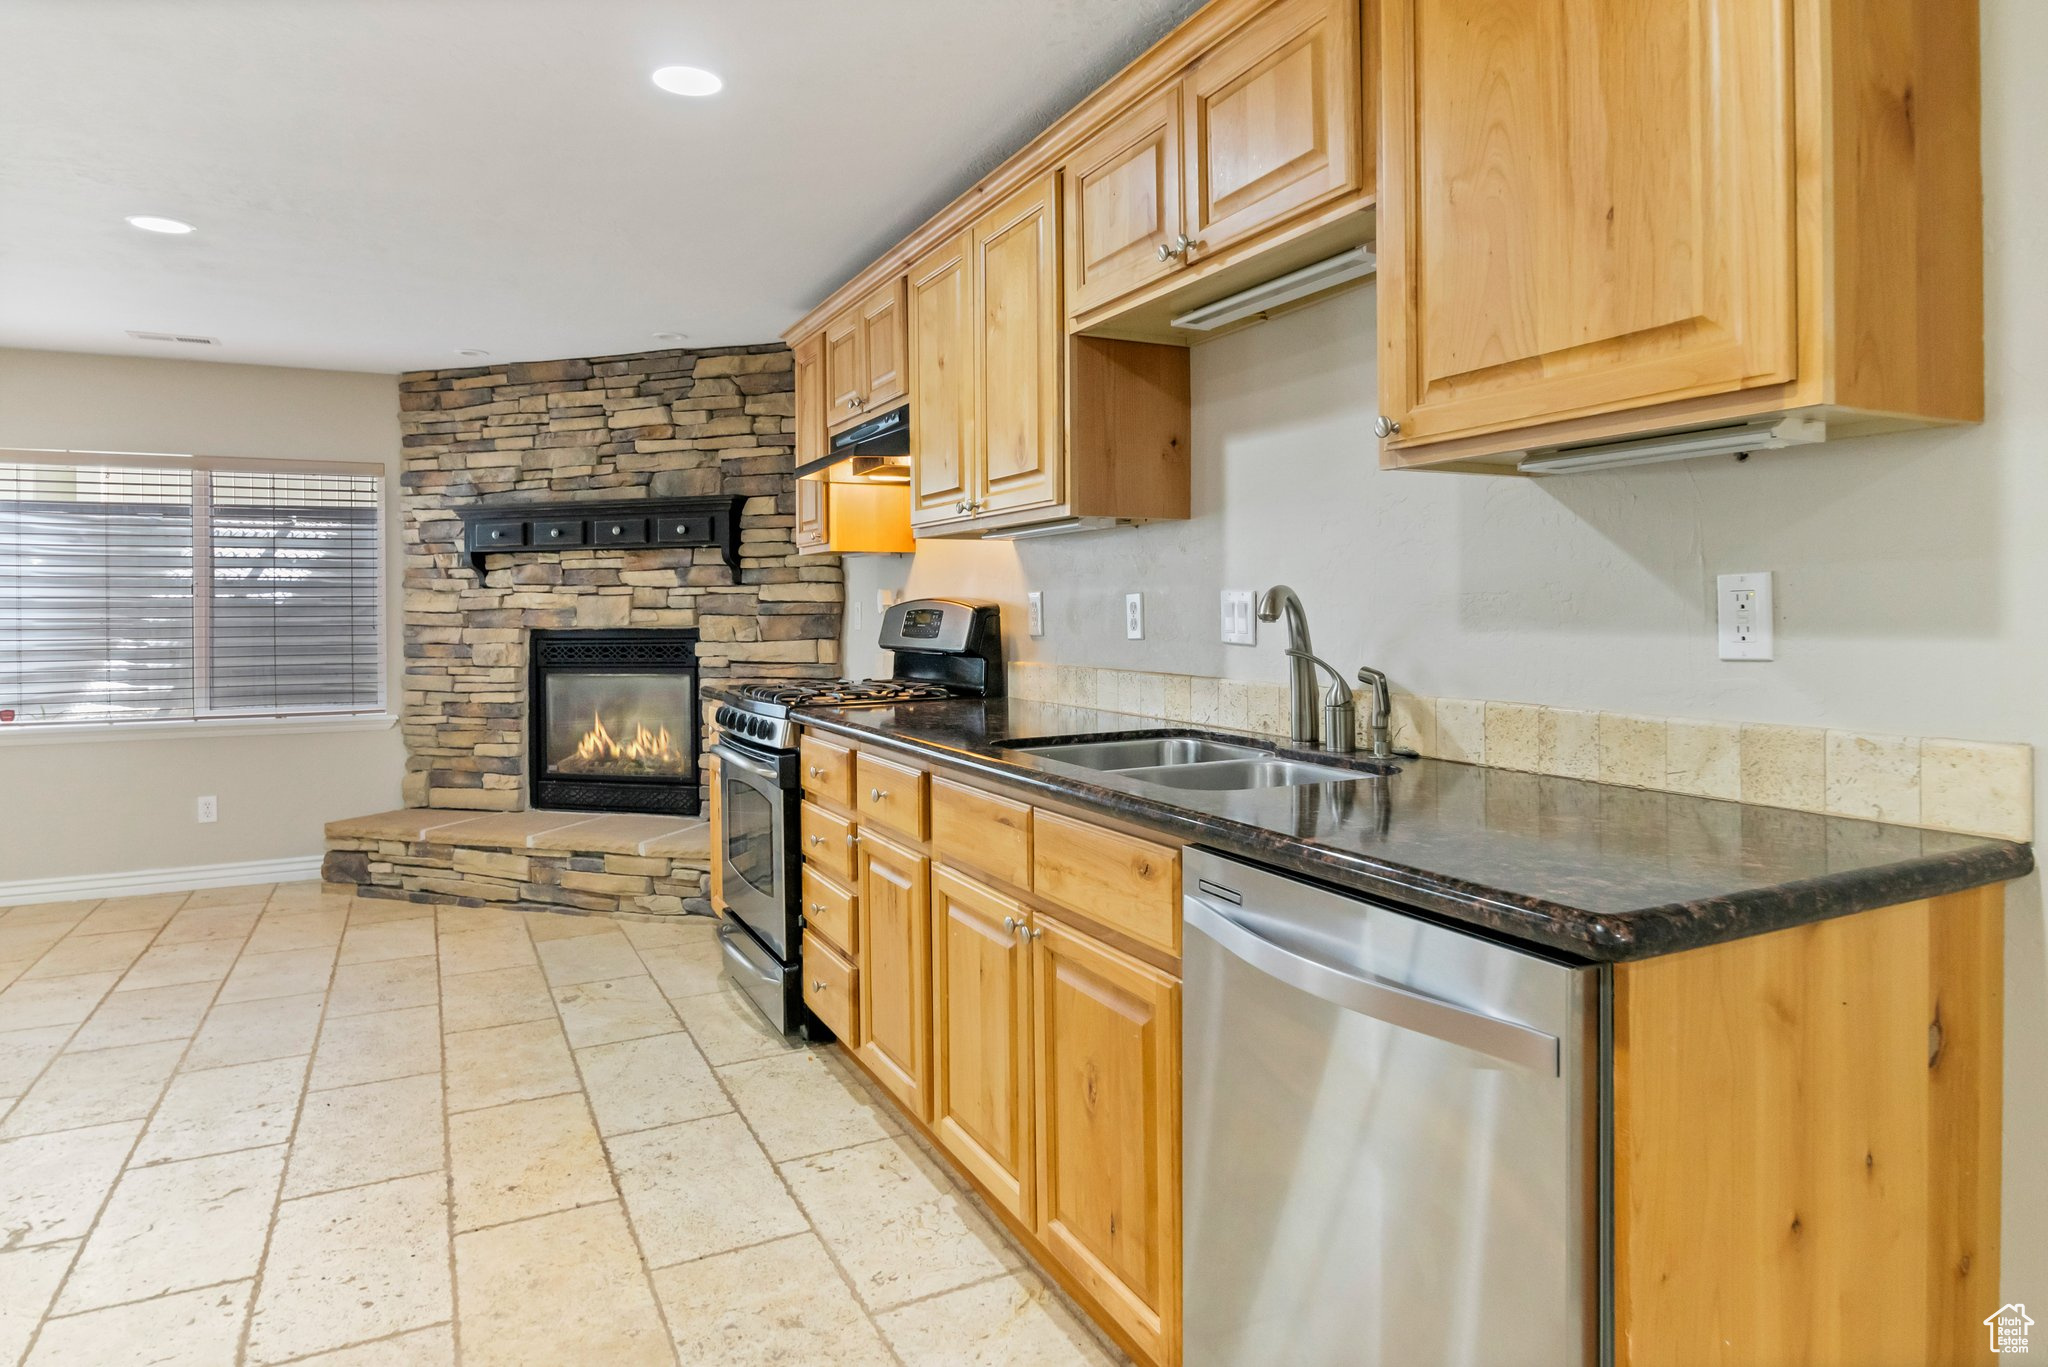 Kitchen with light tile floors, a fireplace, sink, stainless steel appliances, and dark stone countertops